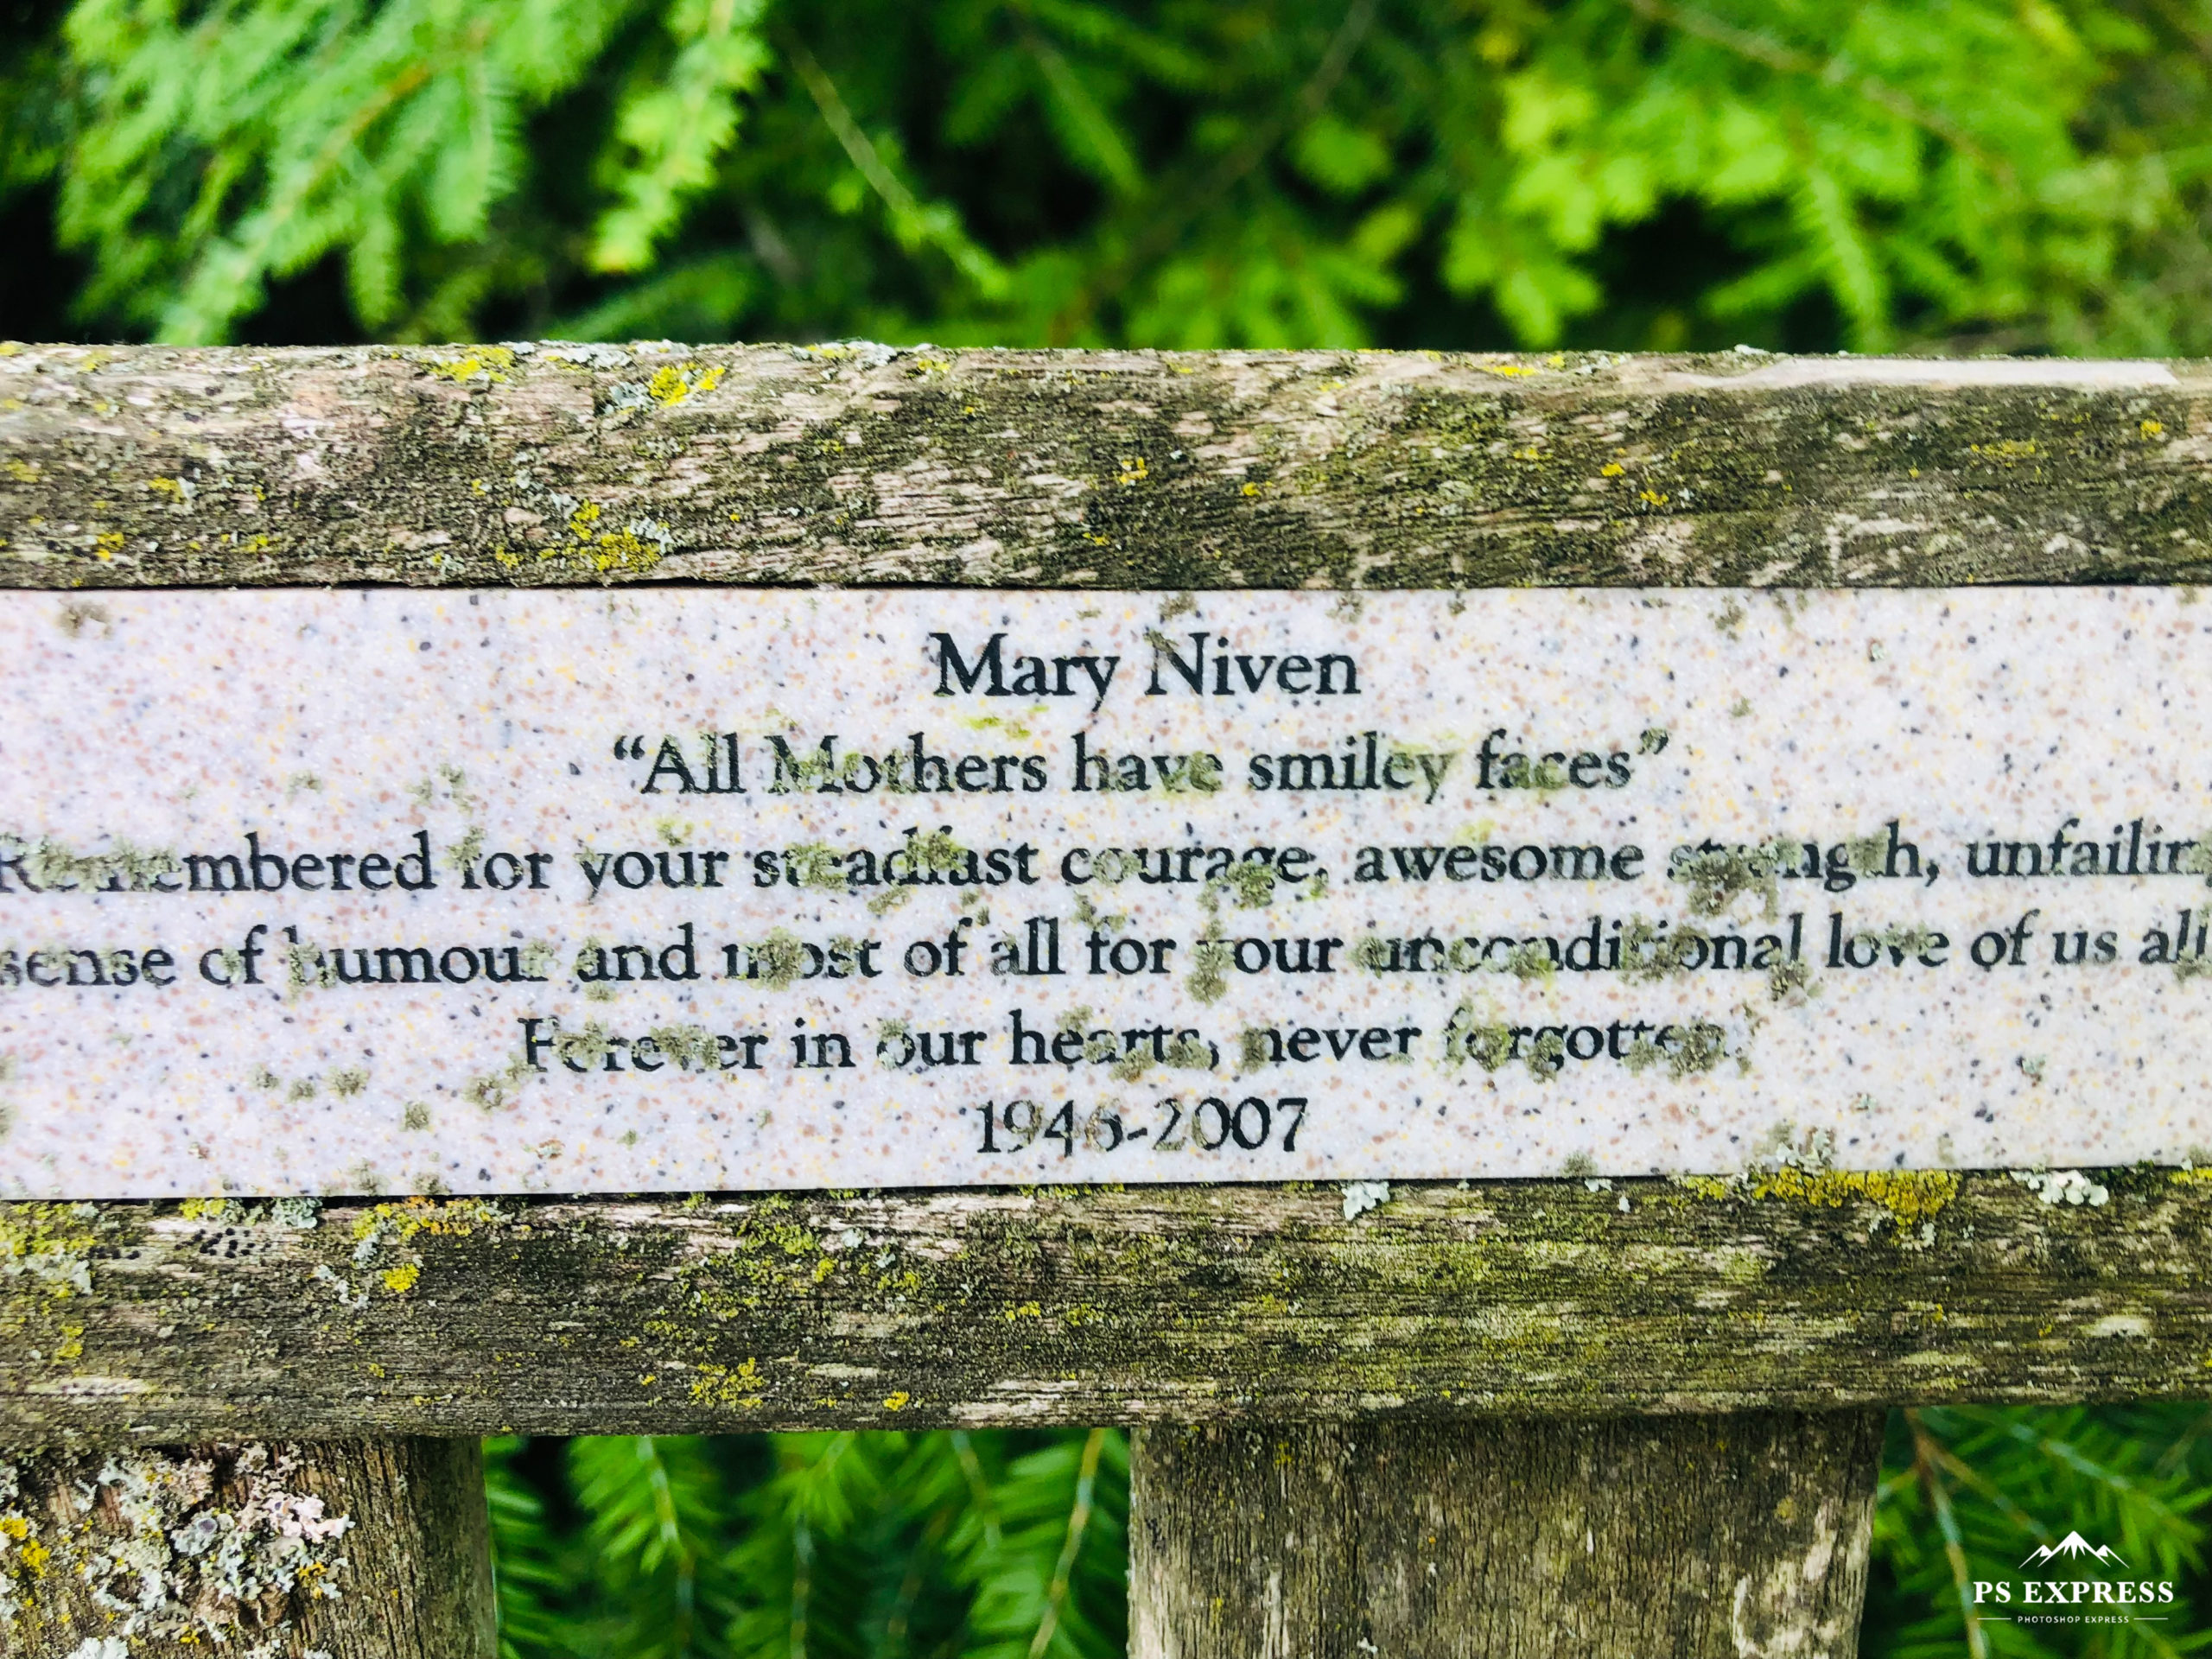 colour photo of a bench plaque with moss growing on it that reads: 
Mary Niven
"All Mother's have smiley faces."
Remembered for their steadfast courage, awesome strength, unfailing humour, and most of all our unconditional love of us all. Forever in our hearts, never forgotten. 1946-2007